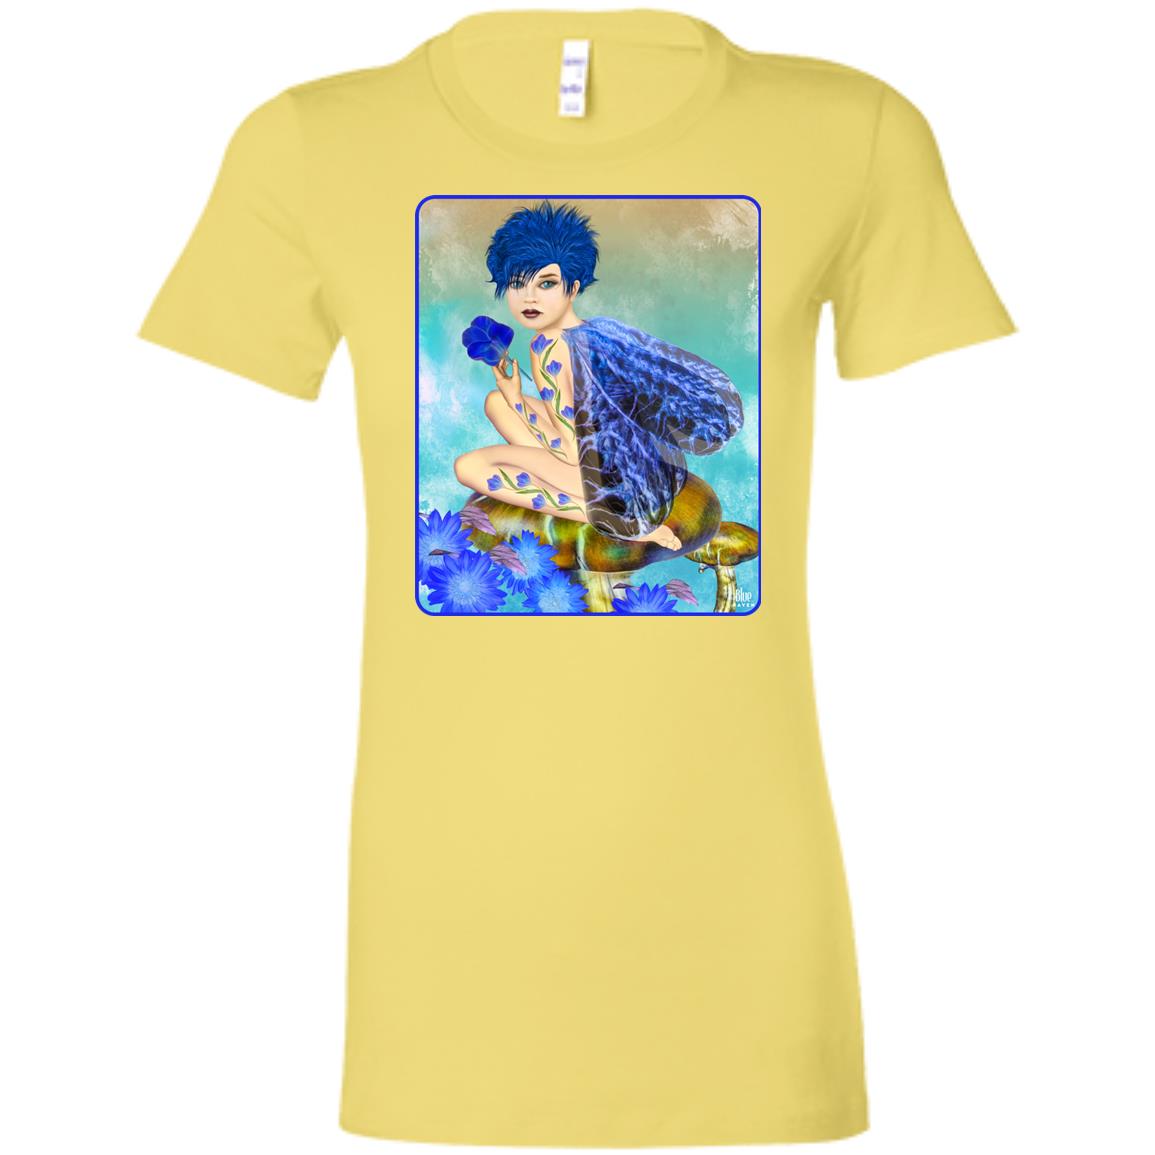 Blue Fairy 2 - Women's Fitted T-Shirt